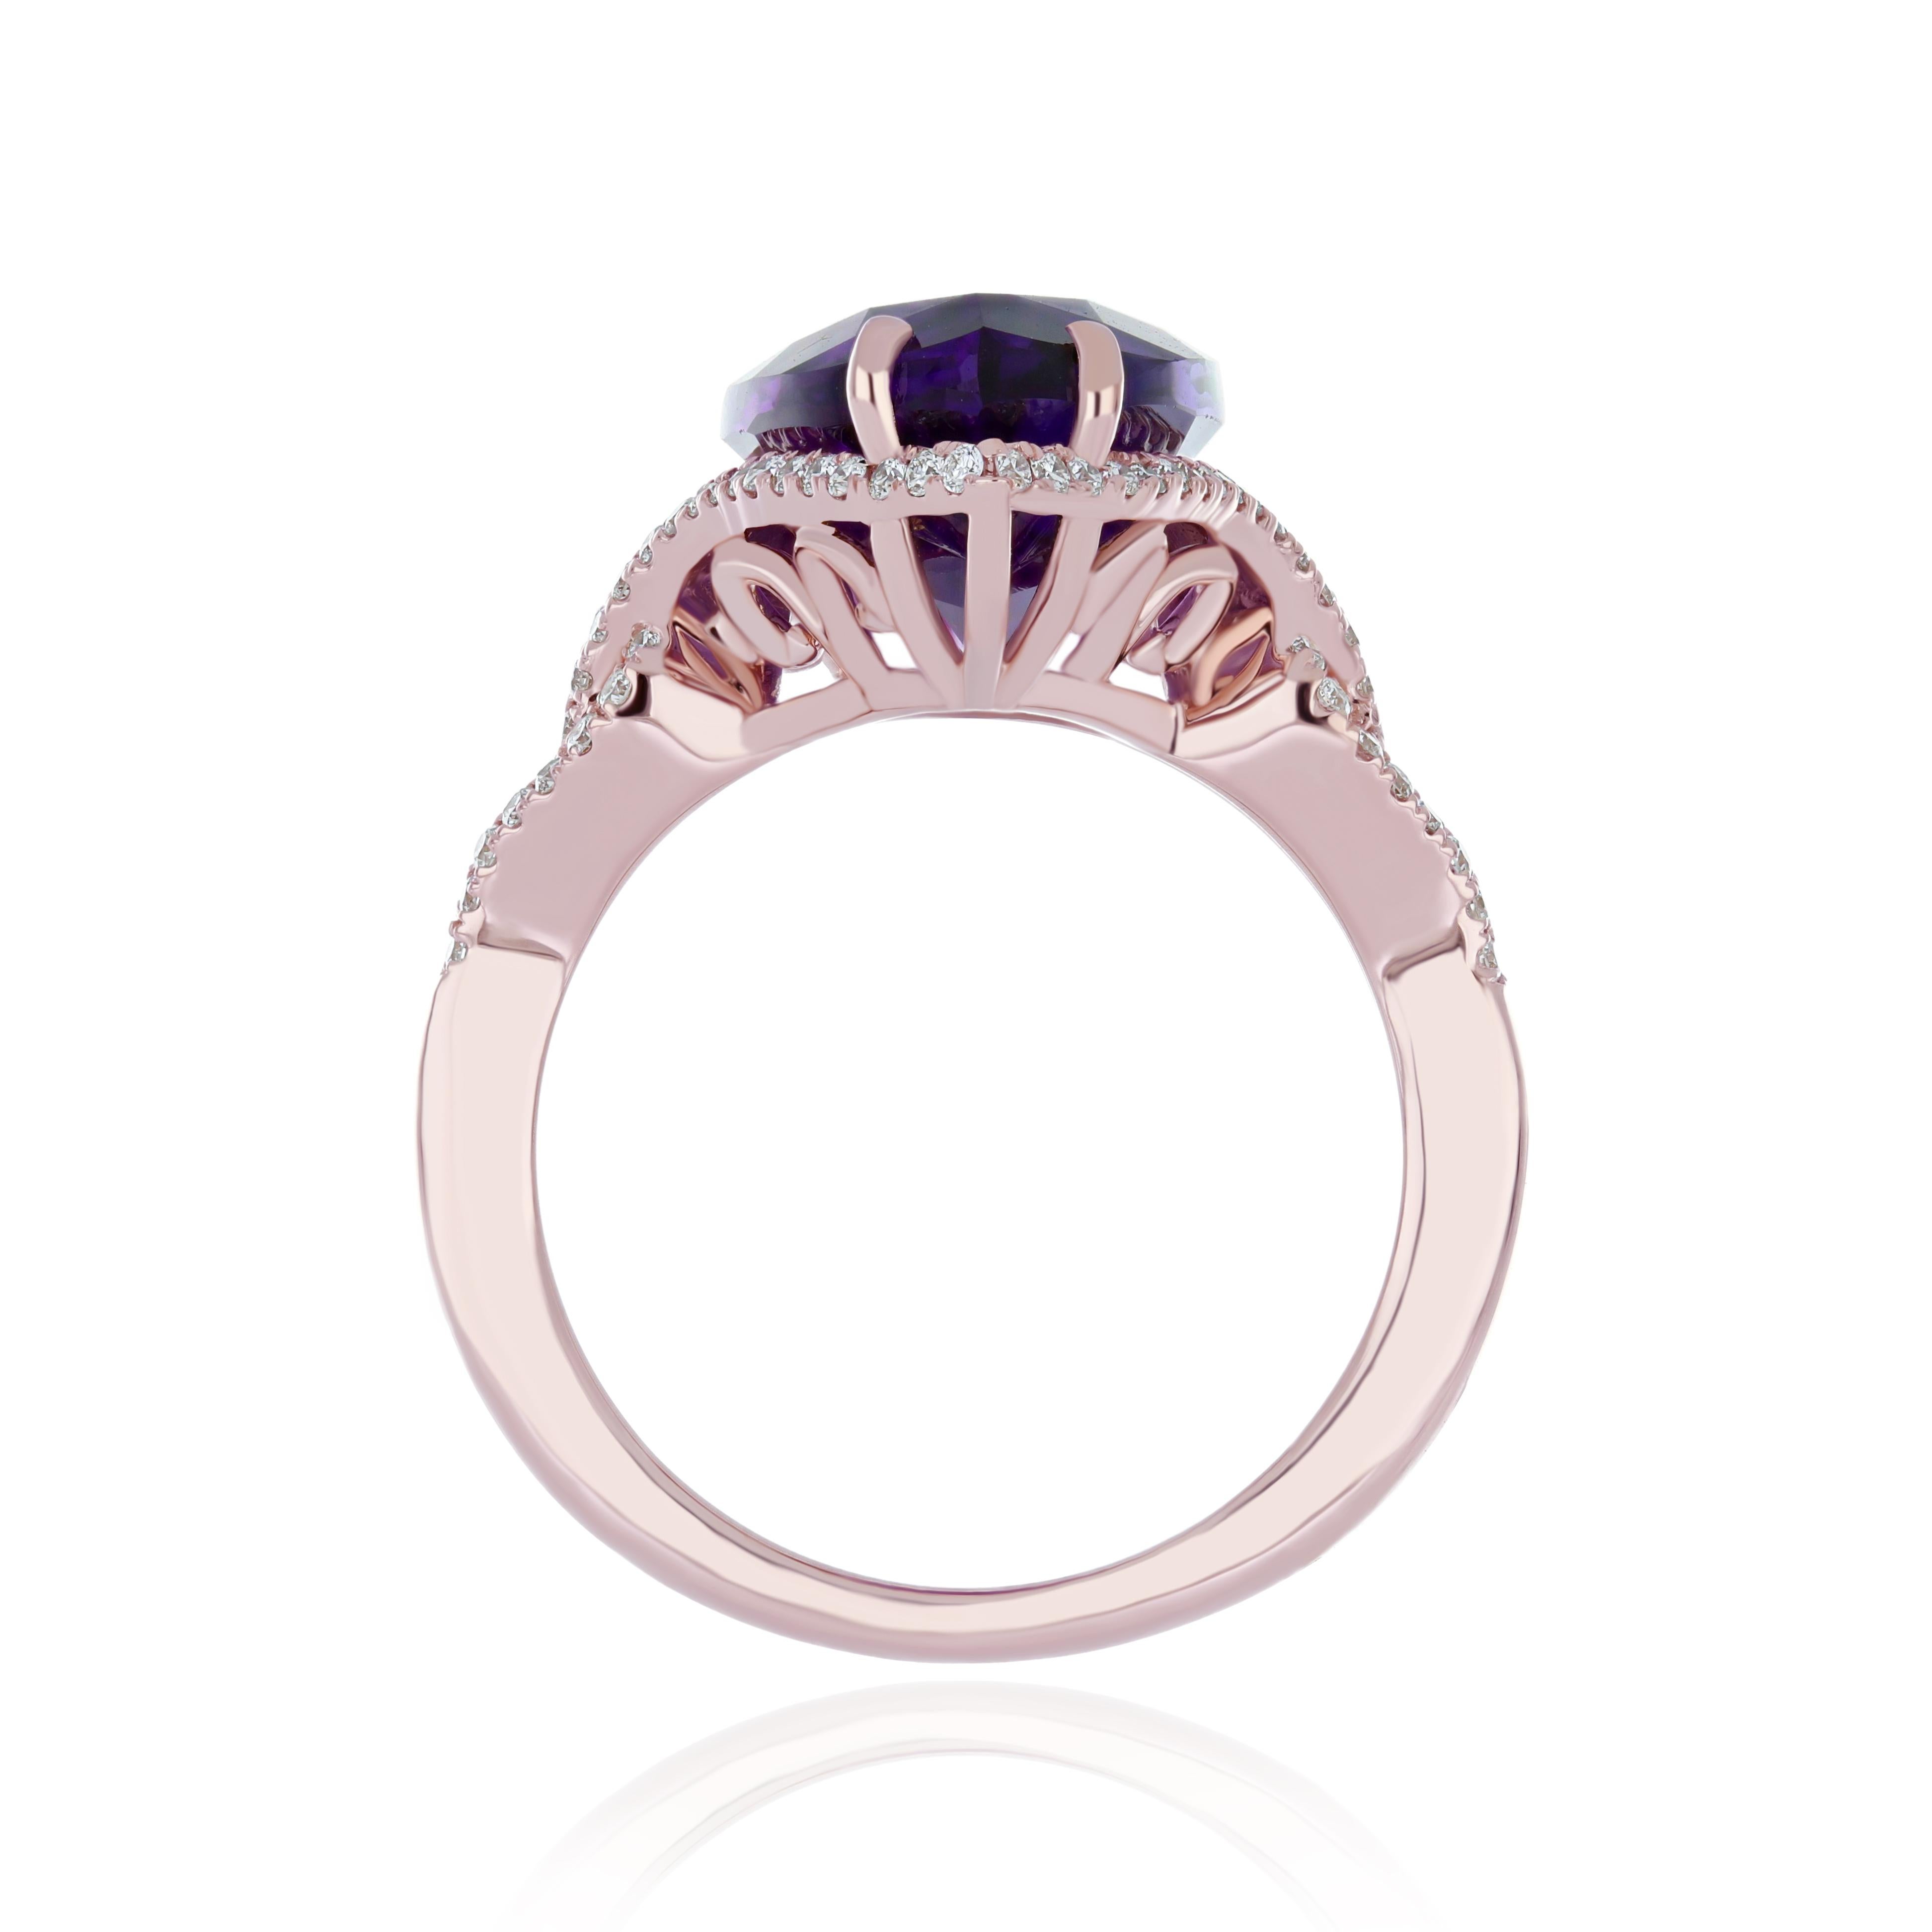 For Sale:  9.85cts Amethyst and Diamond Ring in 14karat Rose Gold Cocktail Ring for Wedding 4